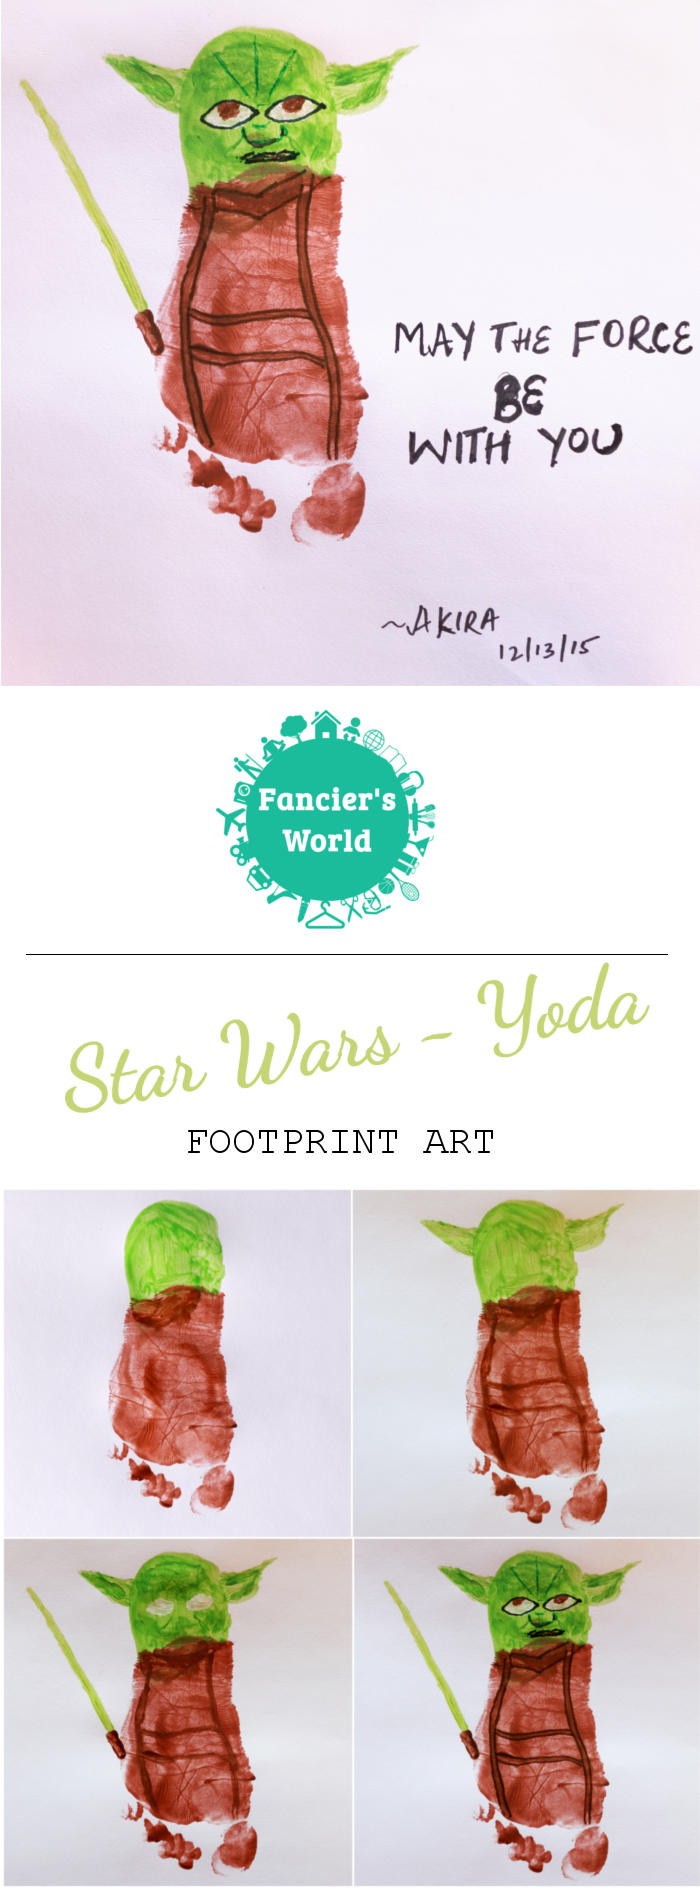 Yoda Footprint Art ~ May the force be with you! Perfect activity to do with your little Star Wars fans.